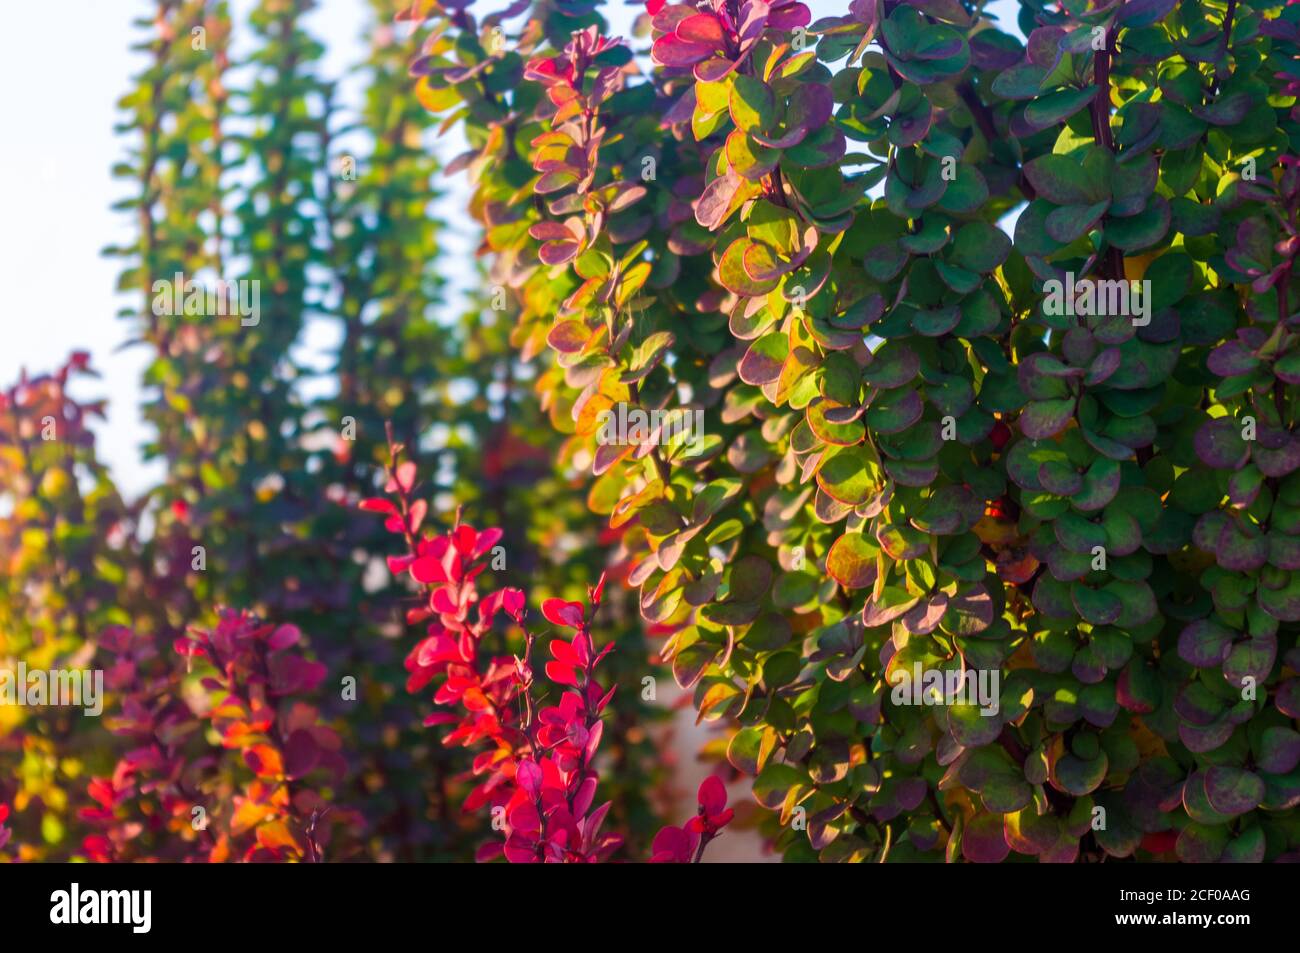 Purple Leaves On Bush Of Thunberg's Barberry, Berberis Thunbergii, The Japanese Barberry, Or Red Barberry illuminated by soft evening sunlight, autumn Stock Photo